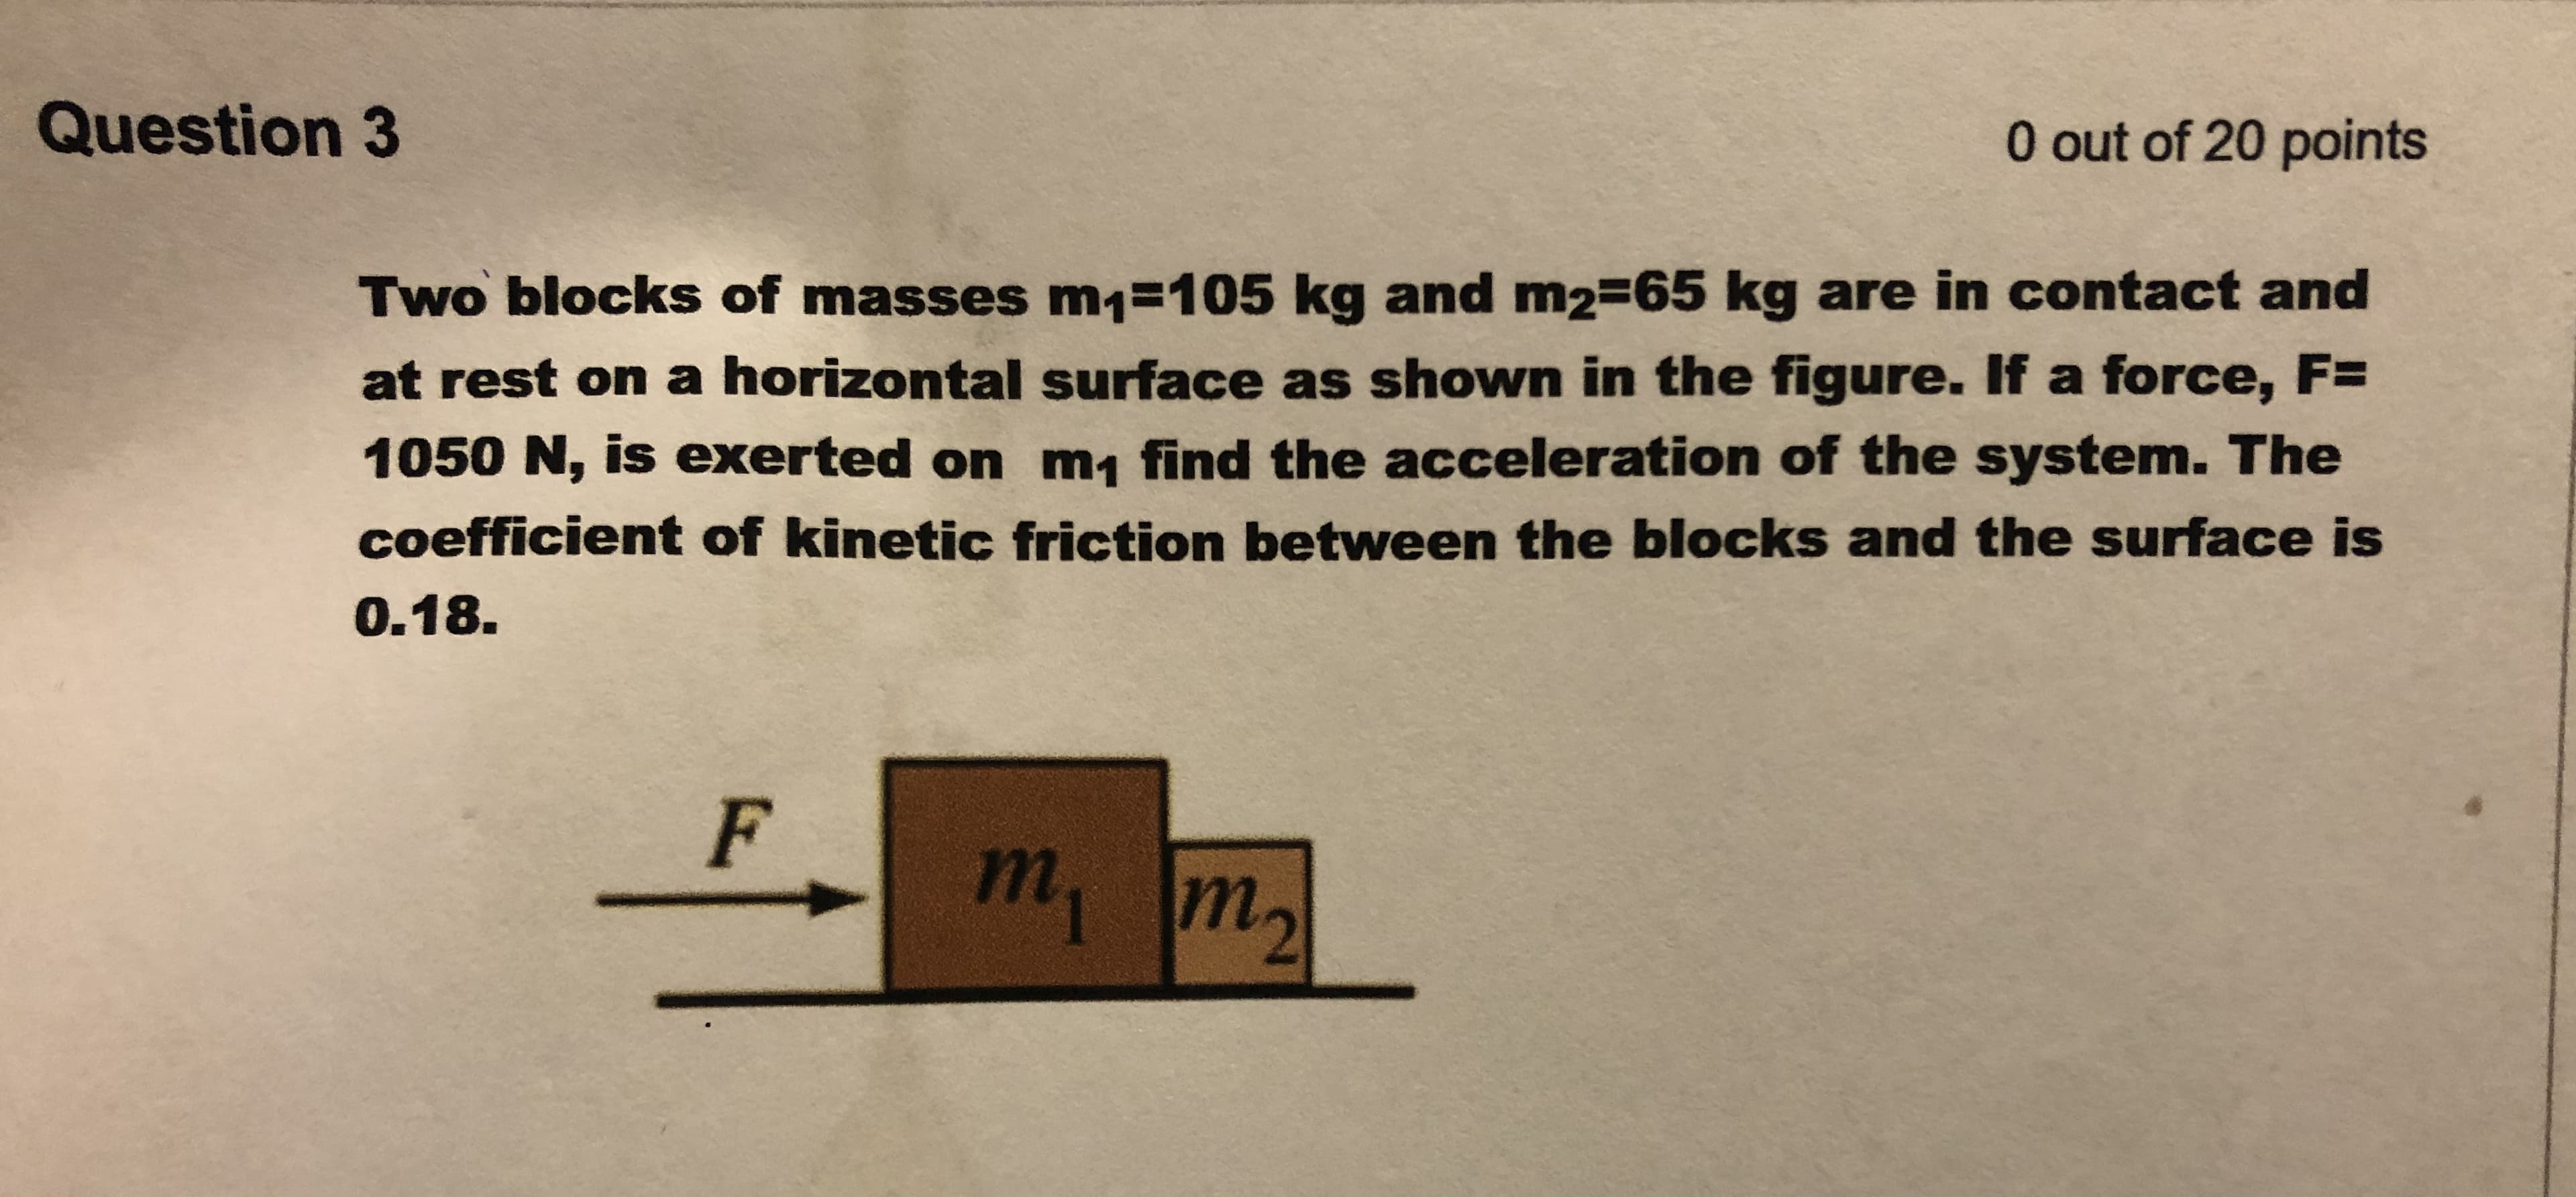 Two blocks of masses m1=105 kg and m2-65 kg are in contact and
at rest on a horizontal surface as shown in the figure. If a force, F=
1050 N, is exerted on m, find the acceleration of the system. The
coefficient of kinetic friction between the blocks and the surface is
0.18.
